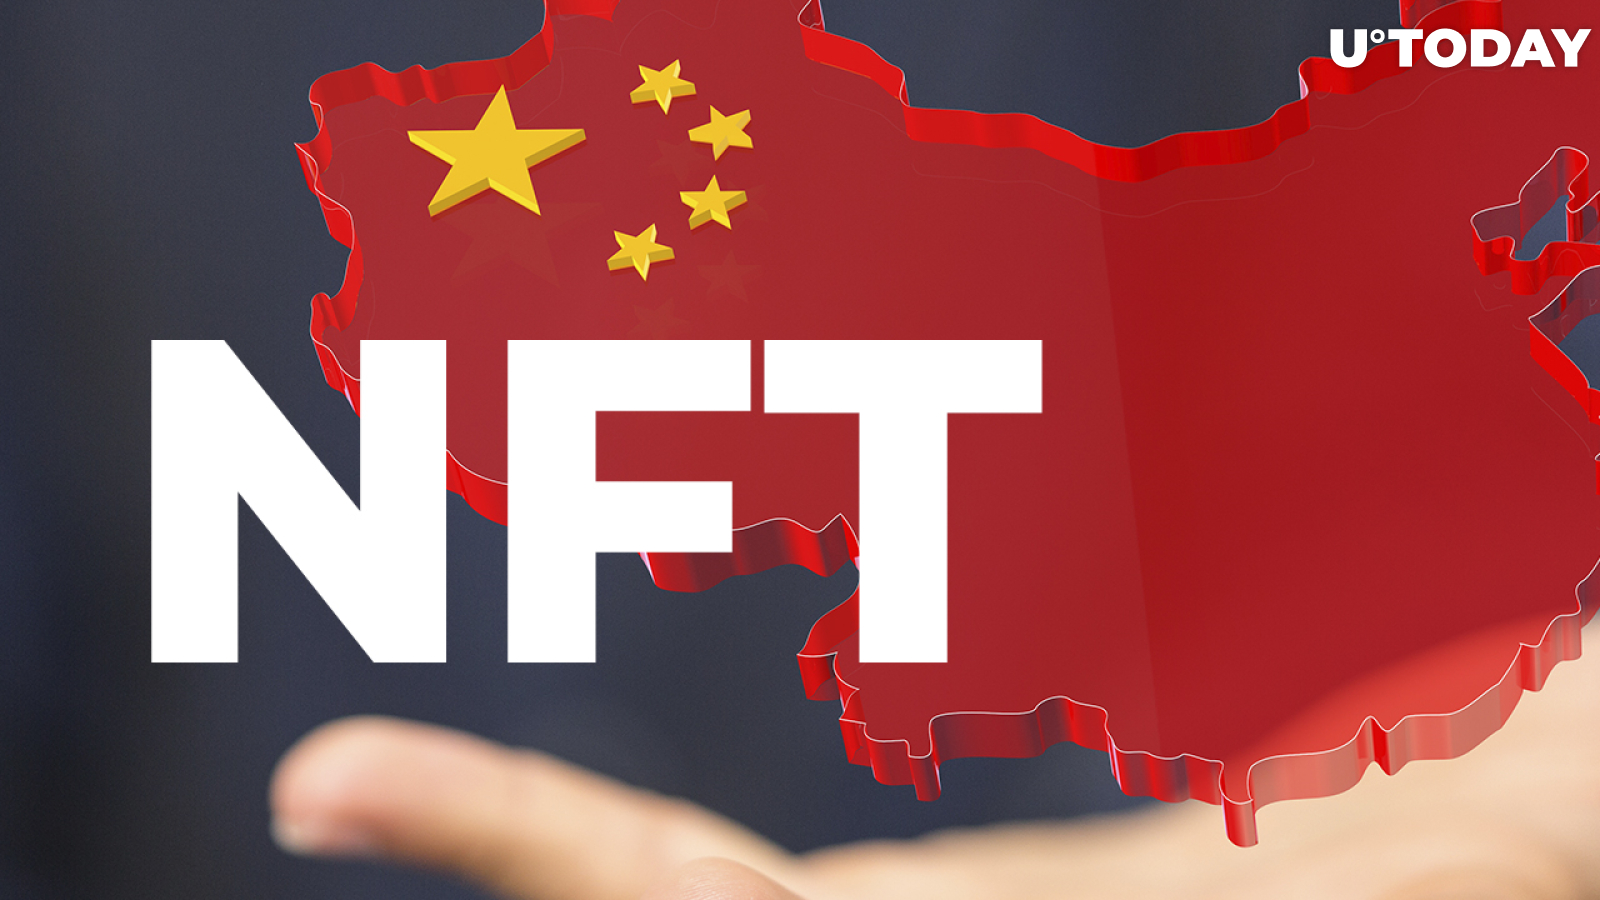 Chinese Central Bank's Bodies Ban BTC, ETH for NFT Settlement, Call for Strict Control of NFT Space